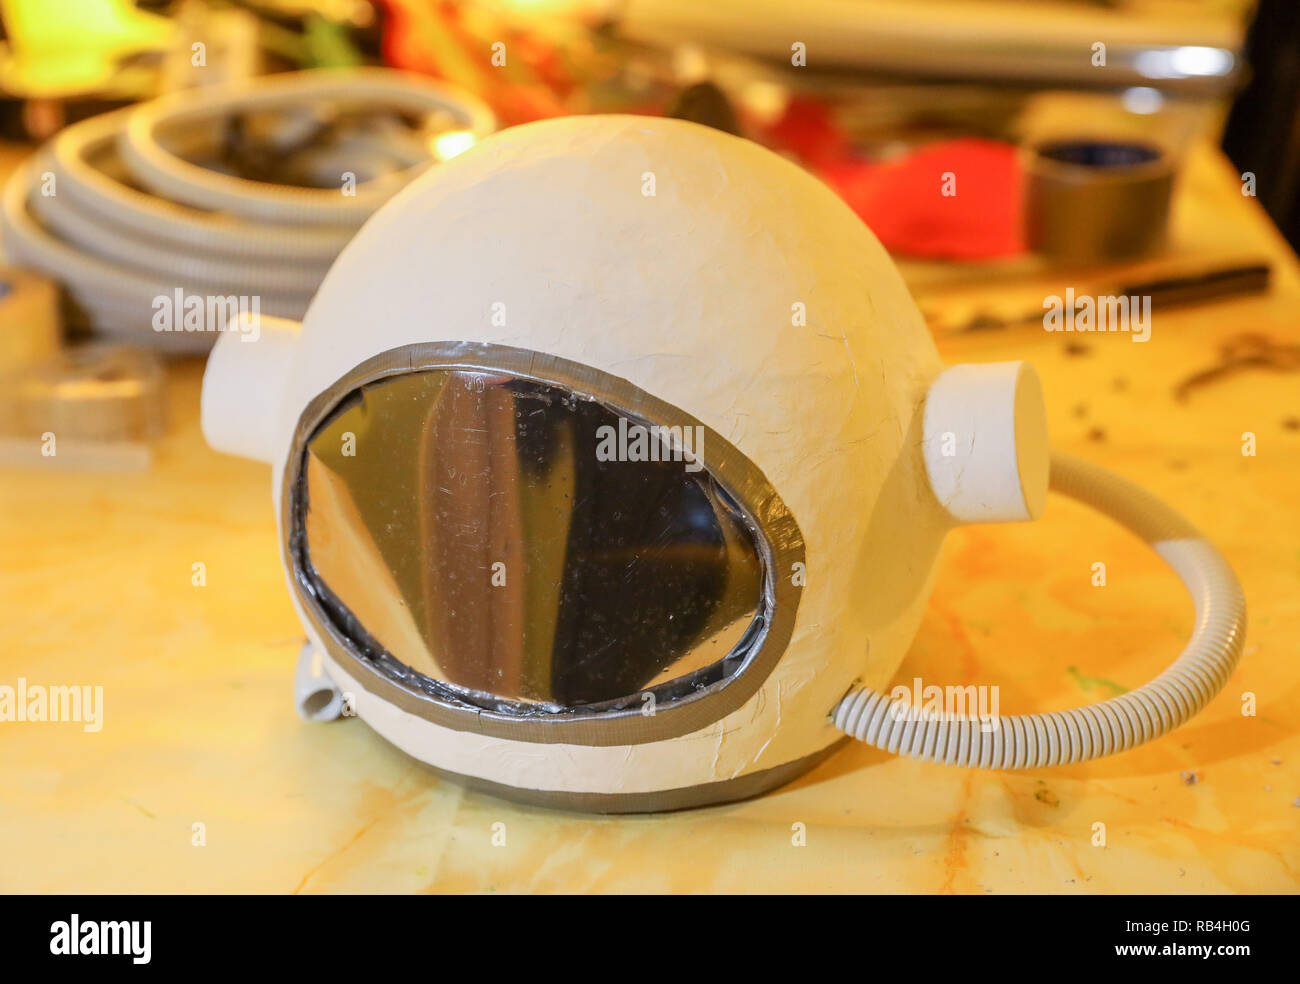 Leipzig, Germany. 11th Feb, 2018. An astronaut's helmet made of papier-mâché  to a costume for an astronaut lies on a table. Credit: Jan  Woitas/dpa-Zentralbild/ZB/dpa/Alamy Live News Stock Photo - Alamy